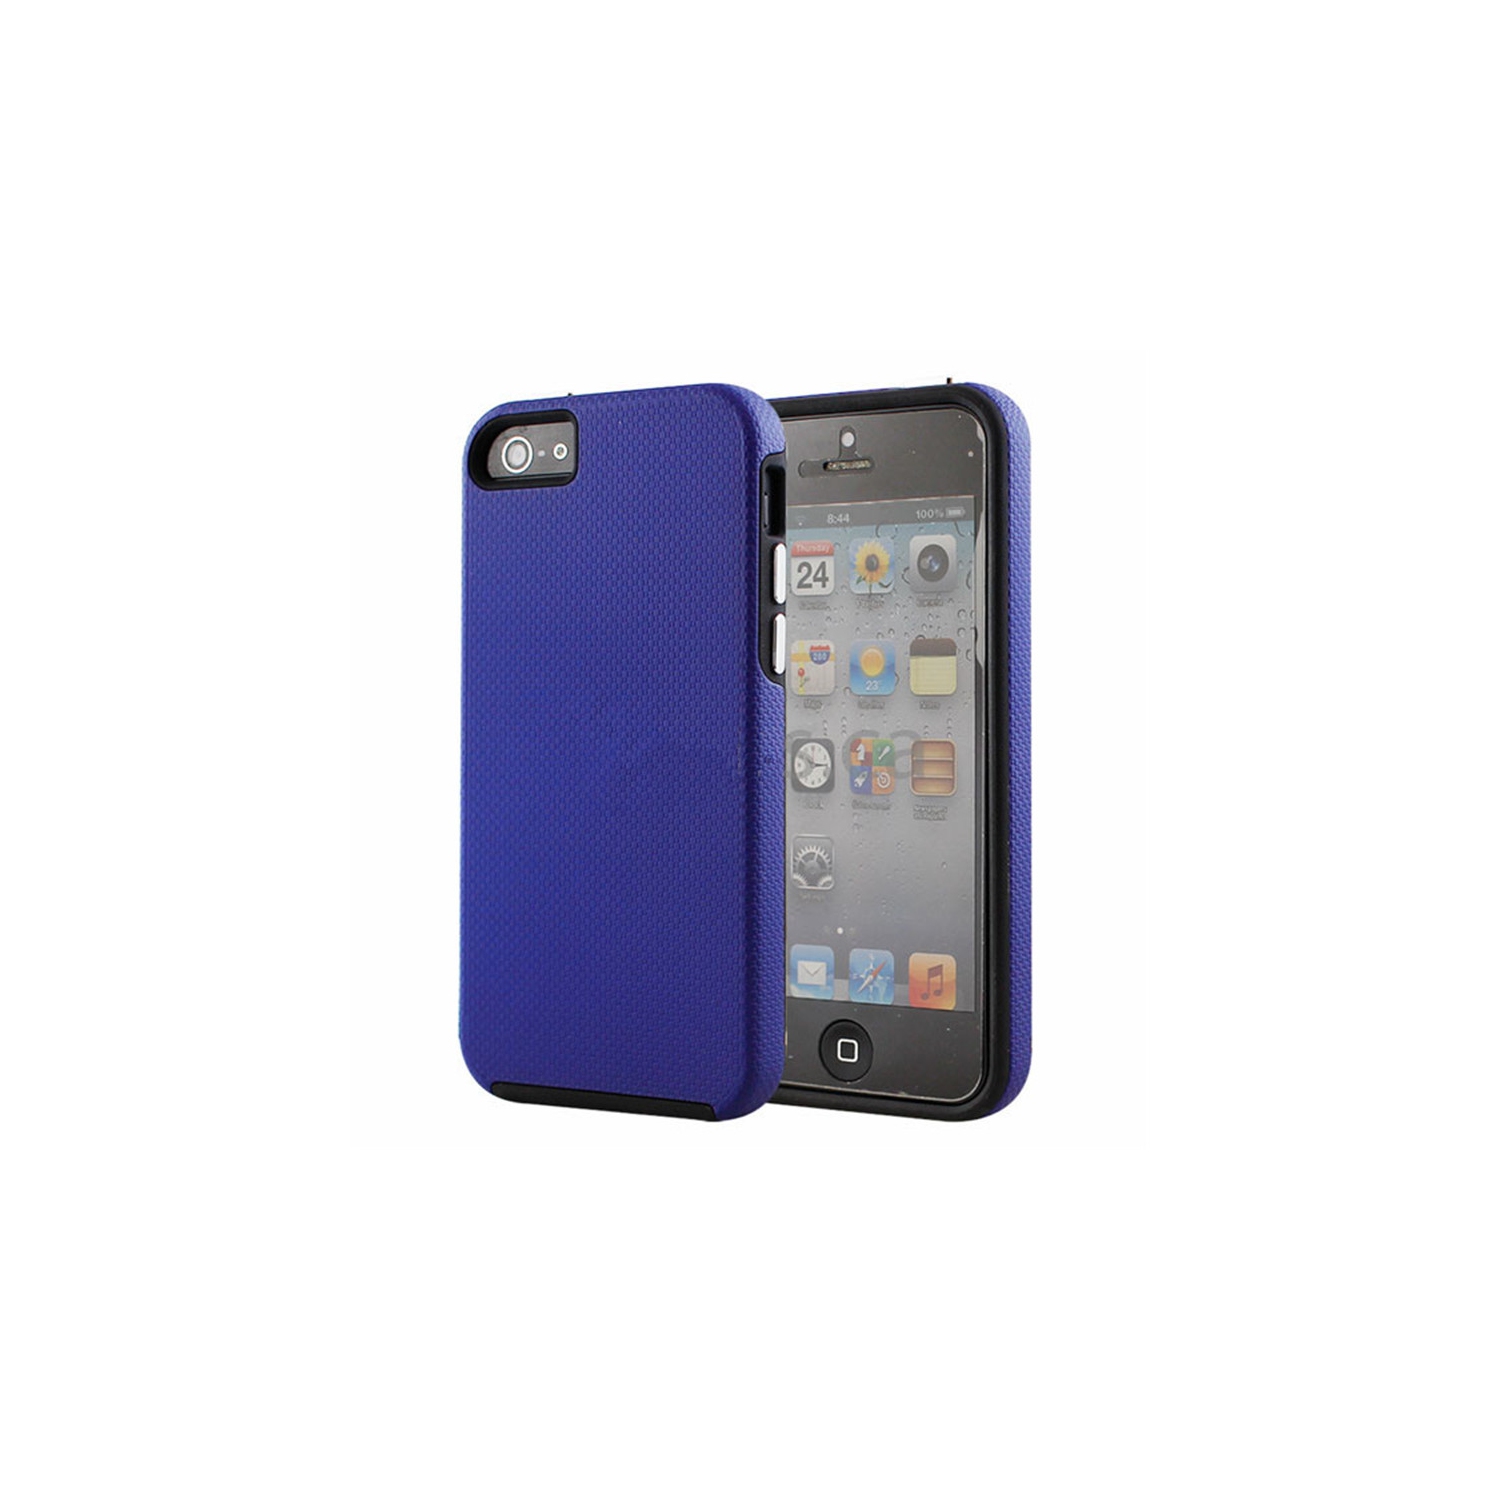 【CSmart】 Slim Fitted Hybrid Hard PC Shell Shockproof Scratch Resistant Case Cover for iPhone 5 / 5S / SE, Navy